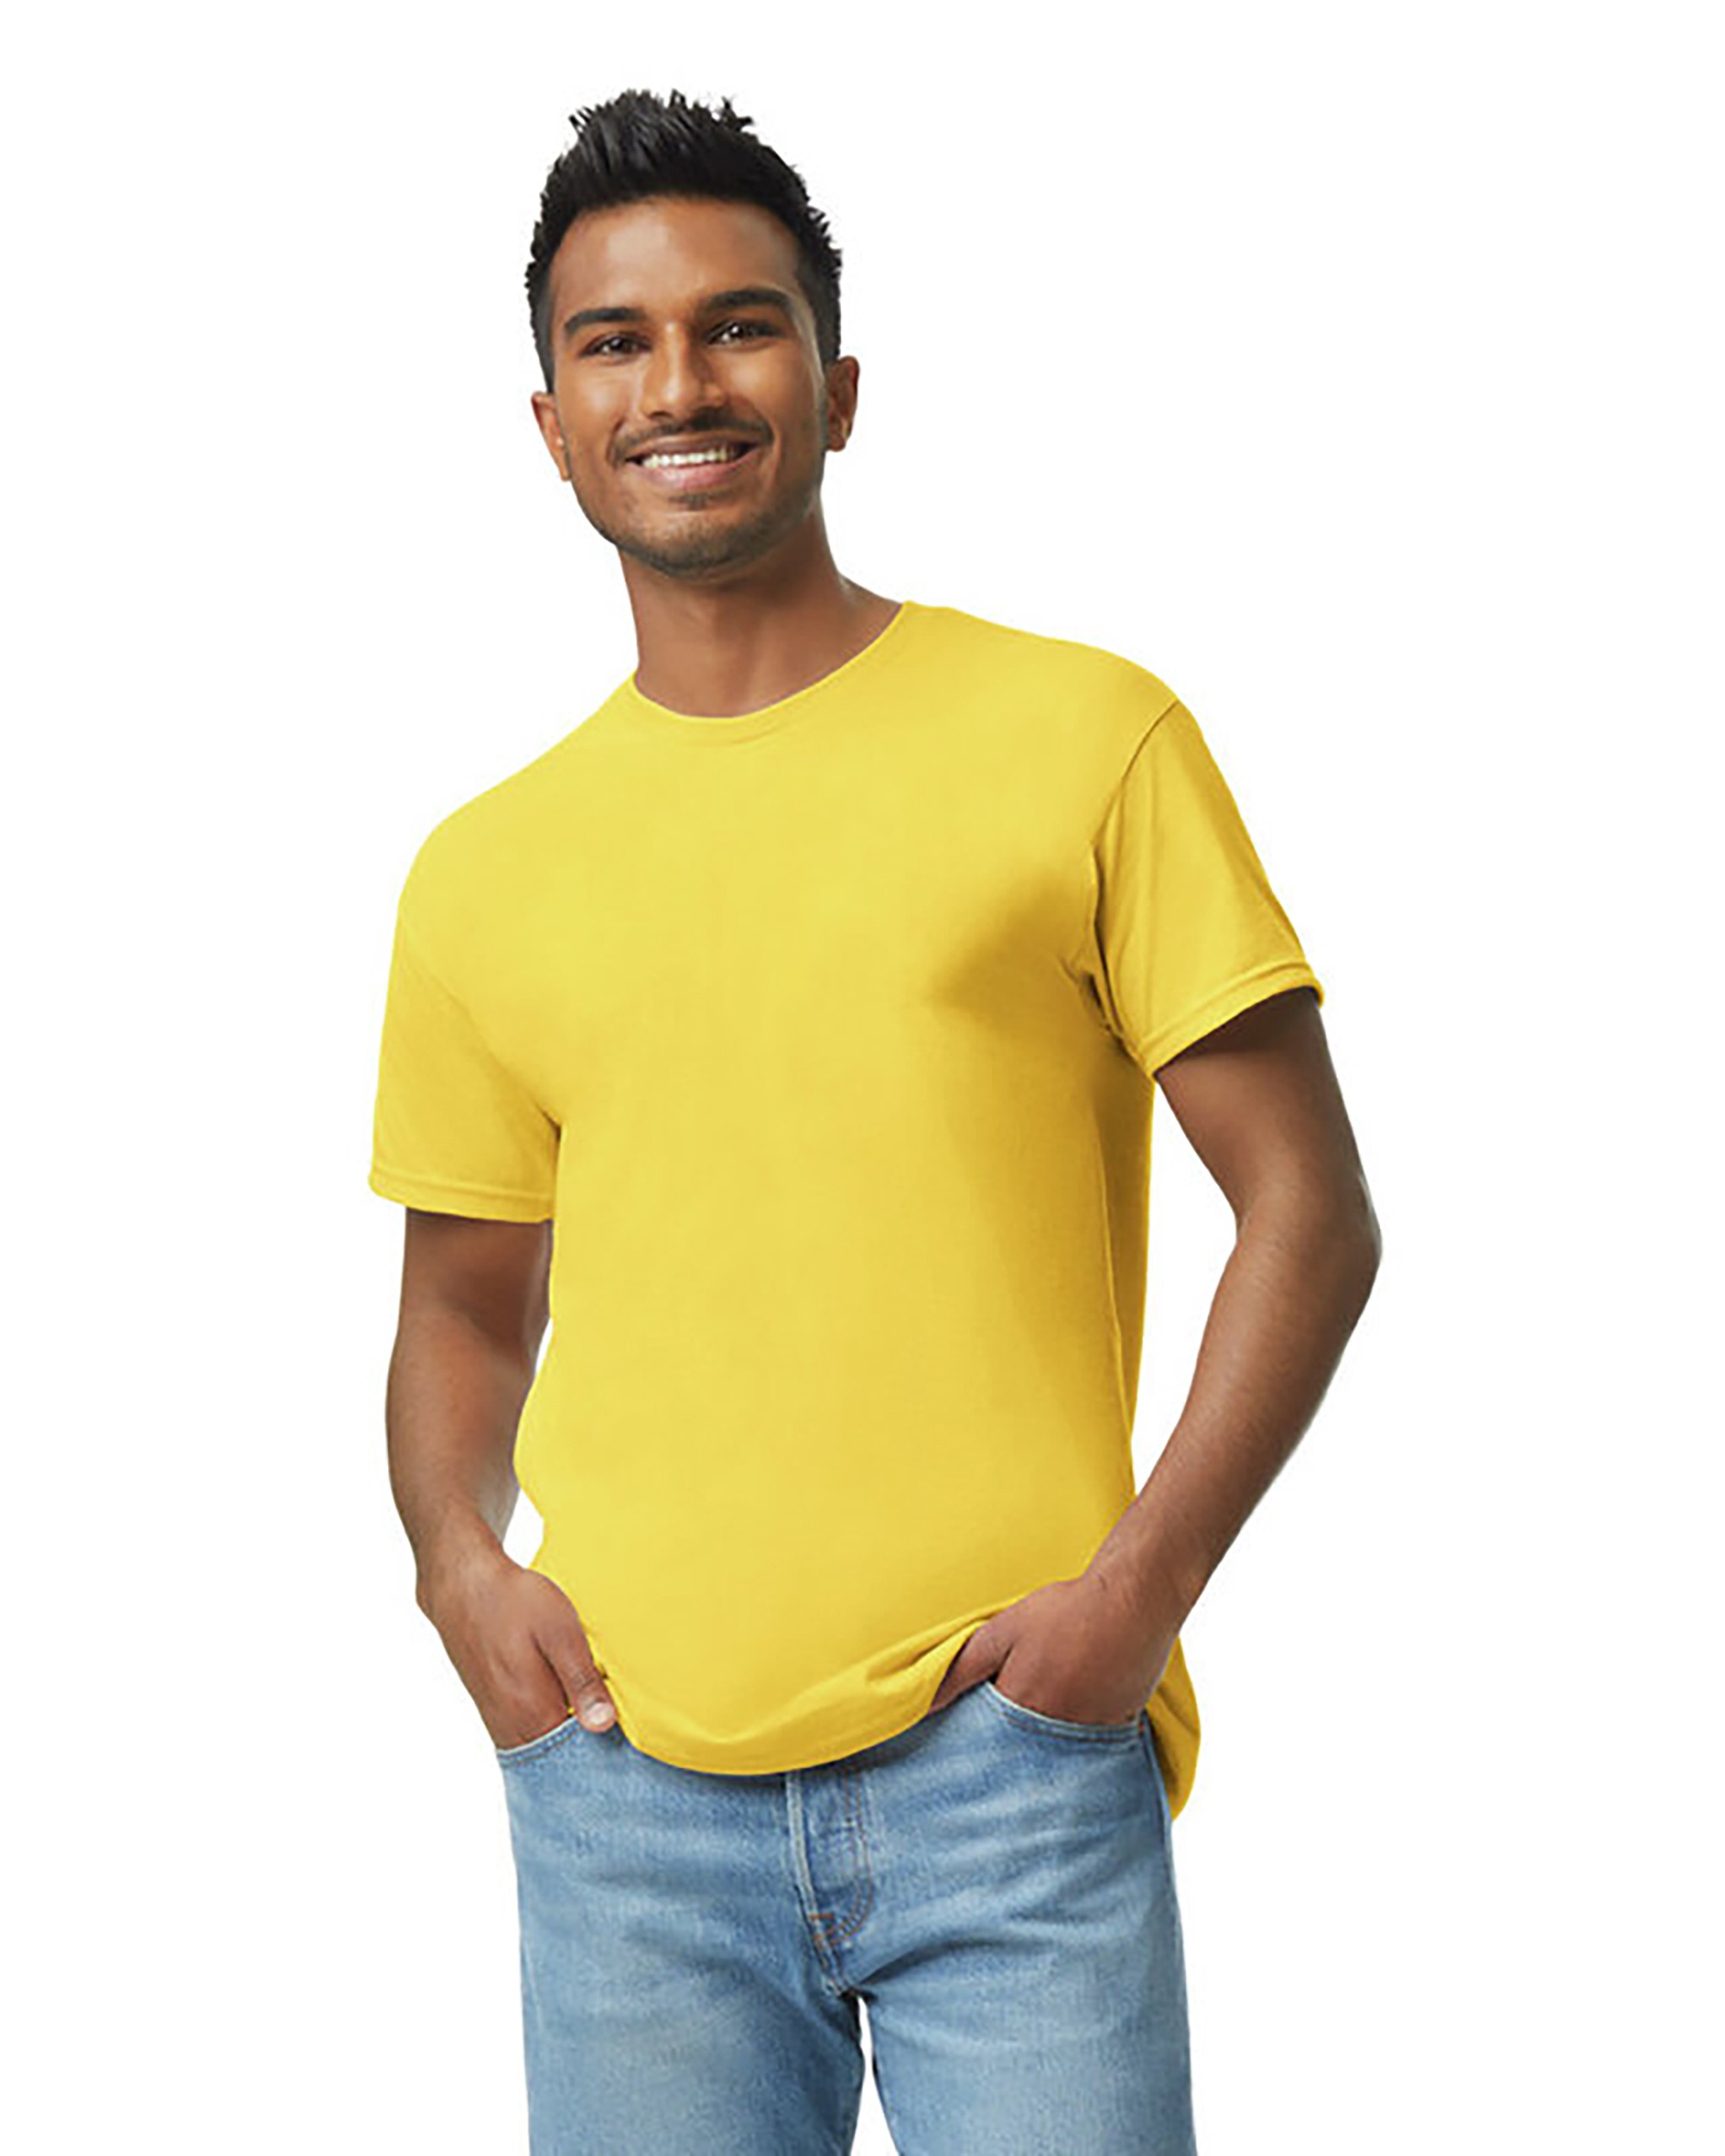 GD210 - Heavy Cotton™ Adult T-Shirt - One Stop